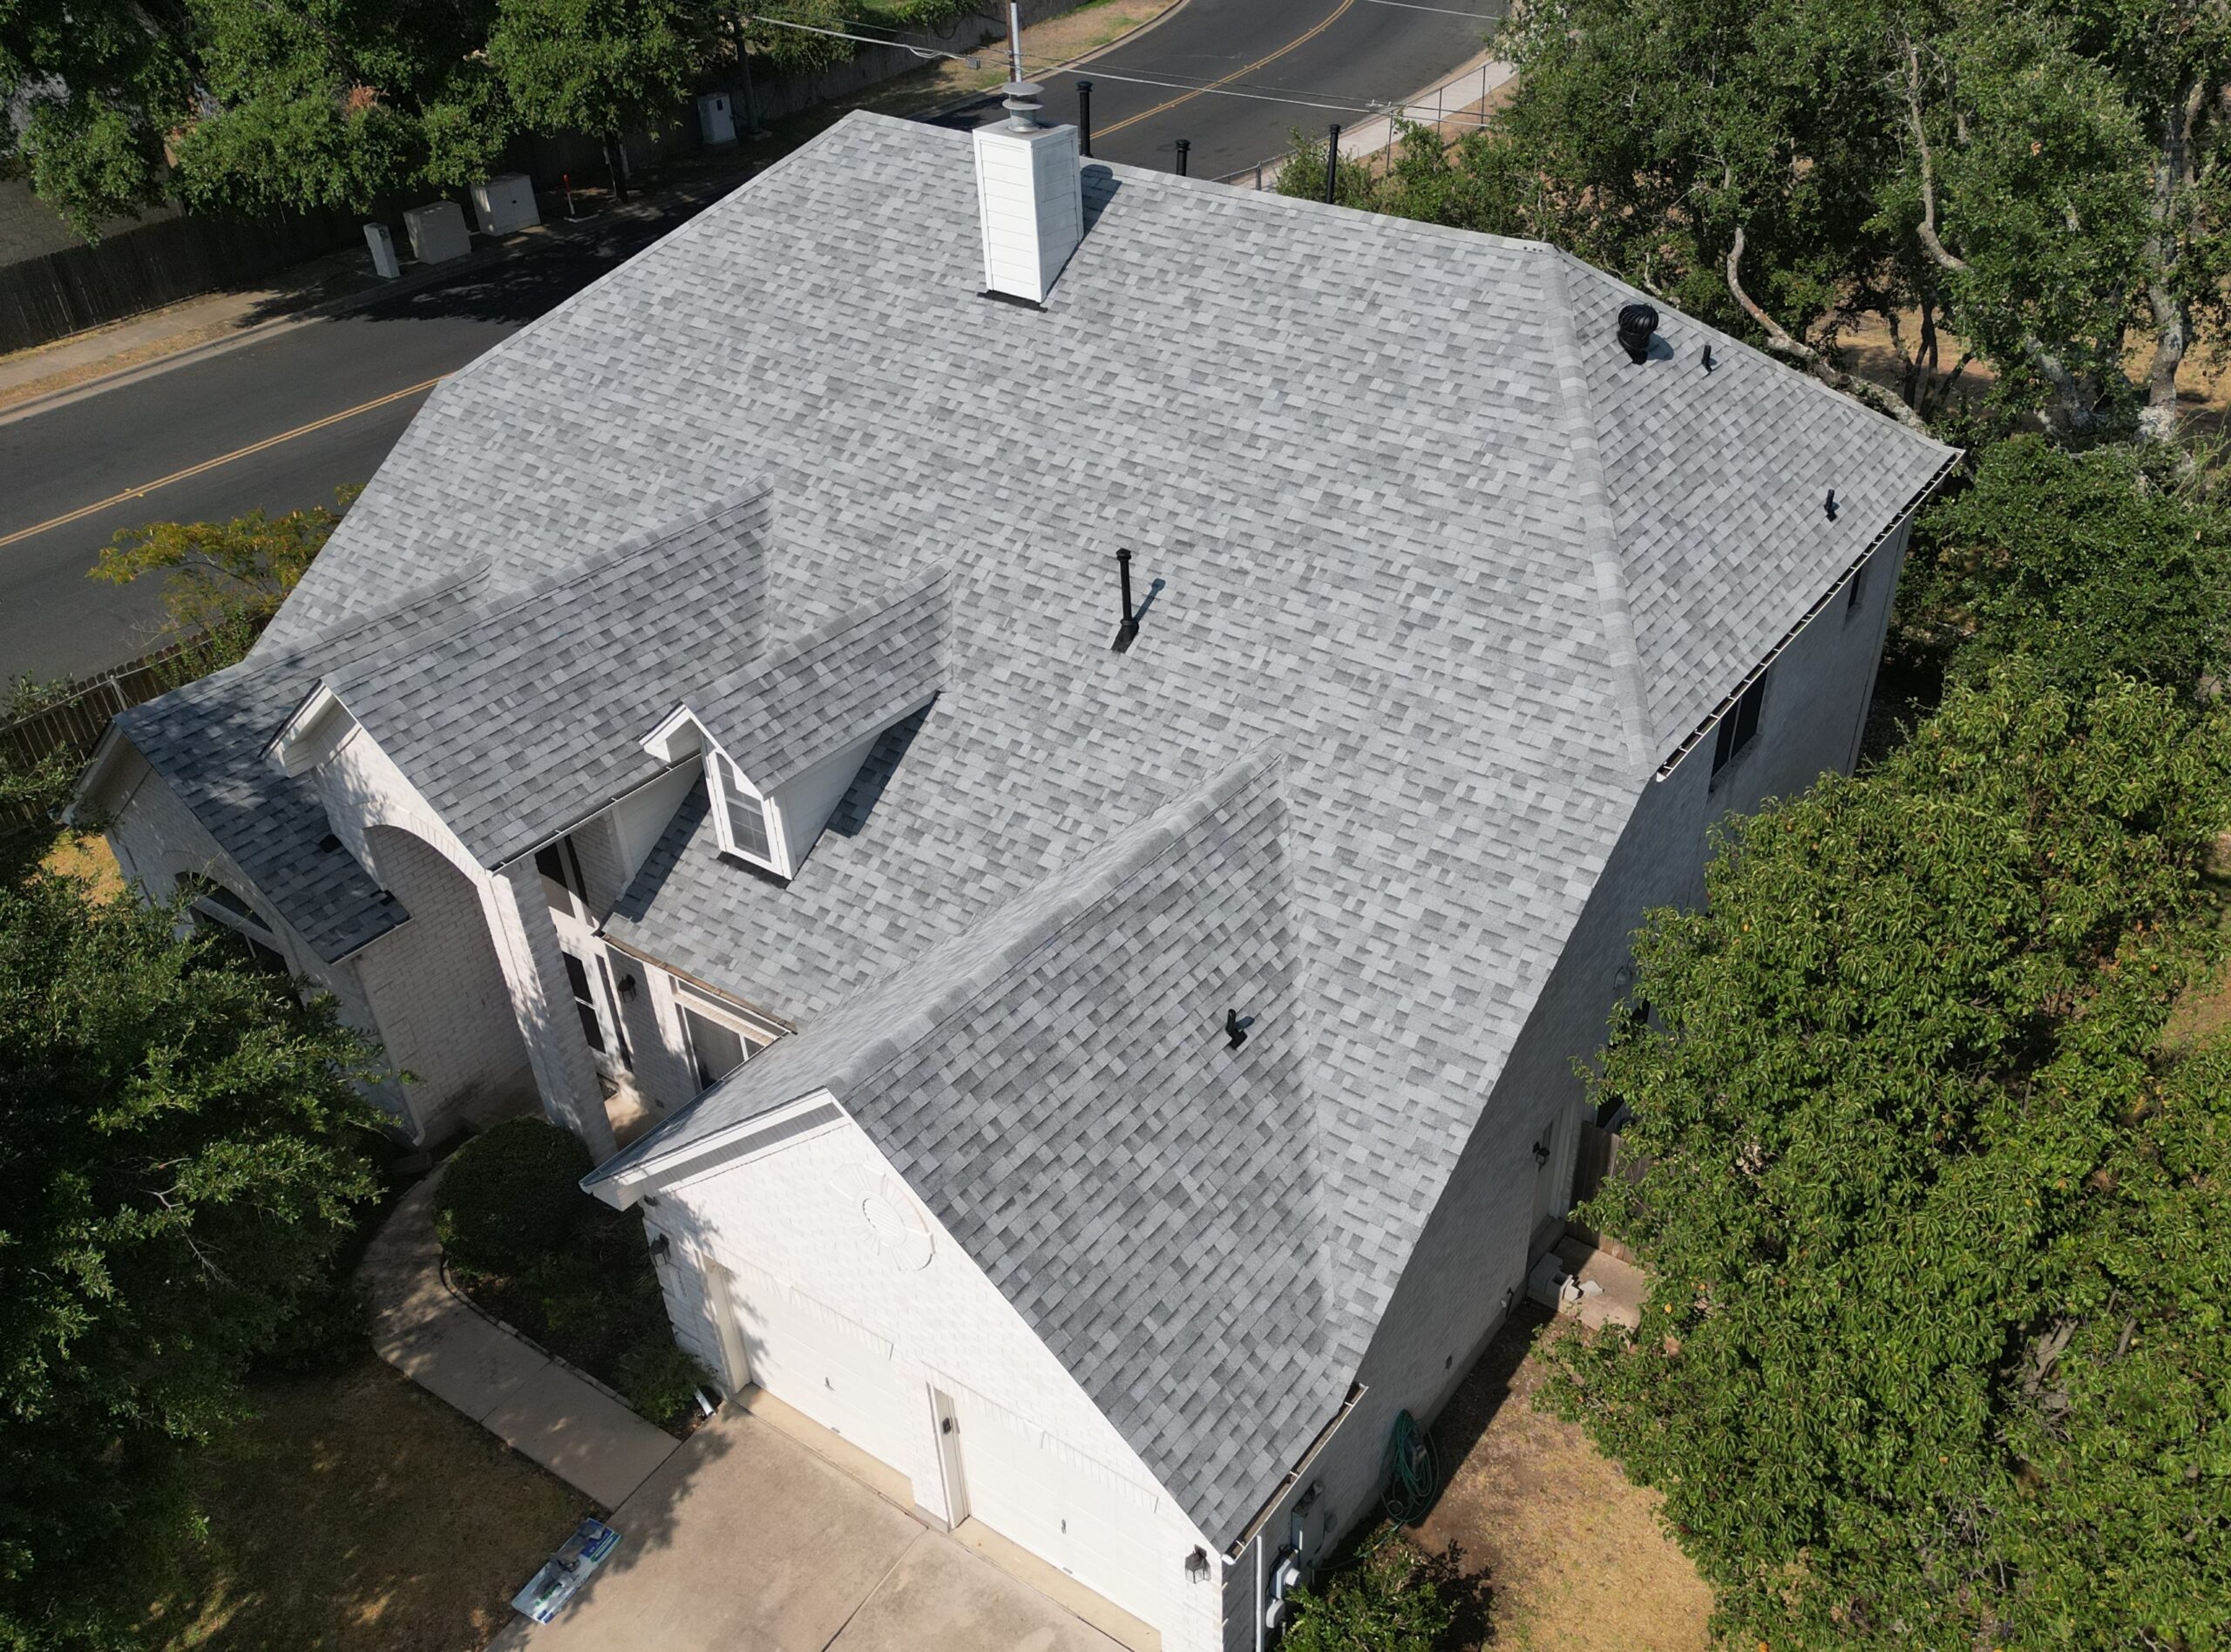 Integrity Roofing guides you with honesty through the restoration process.